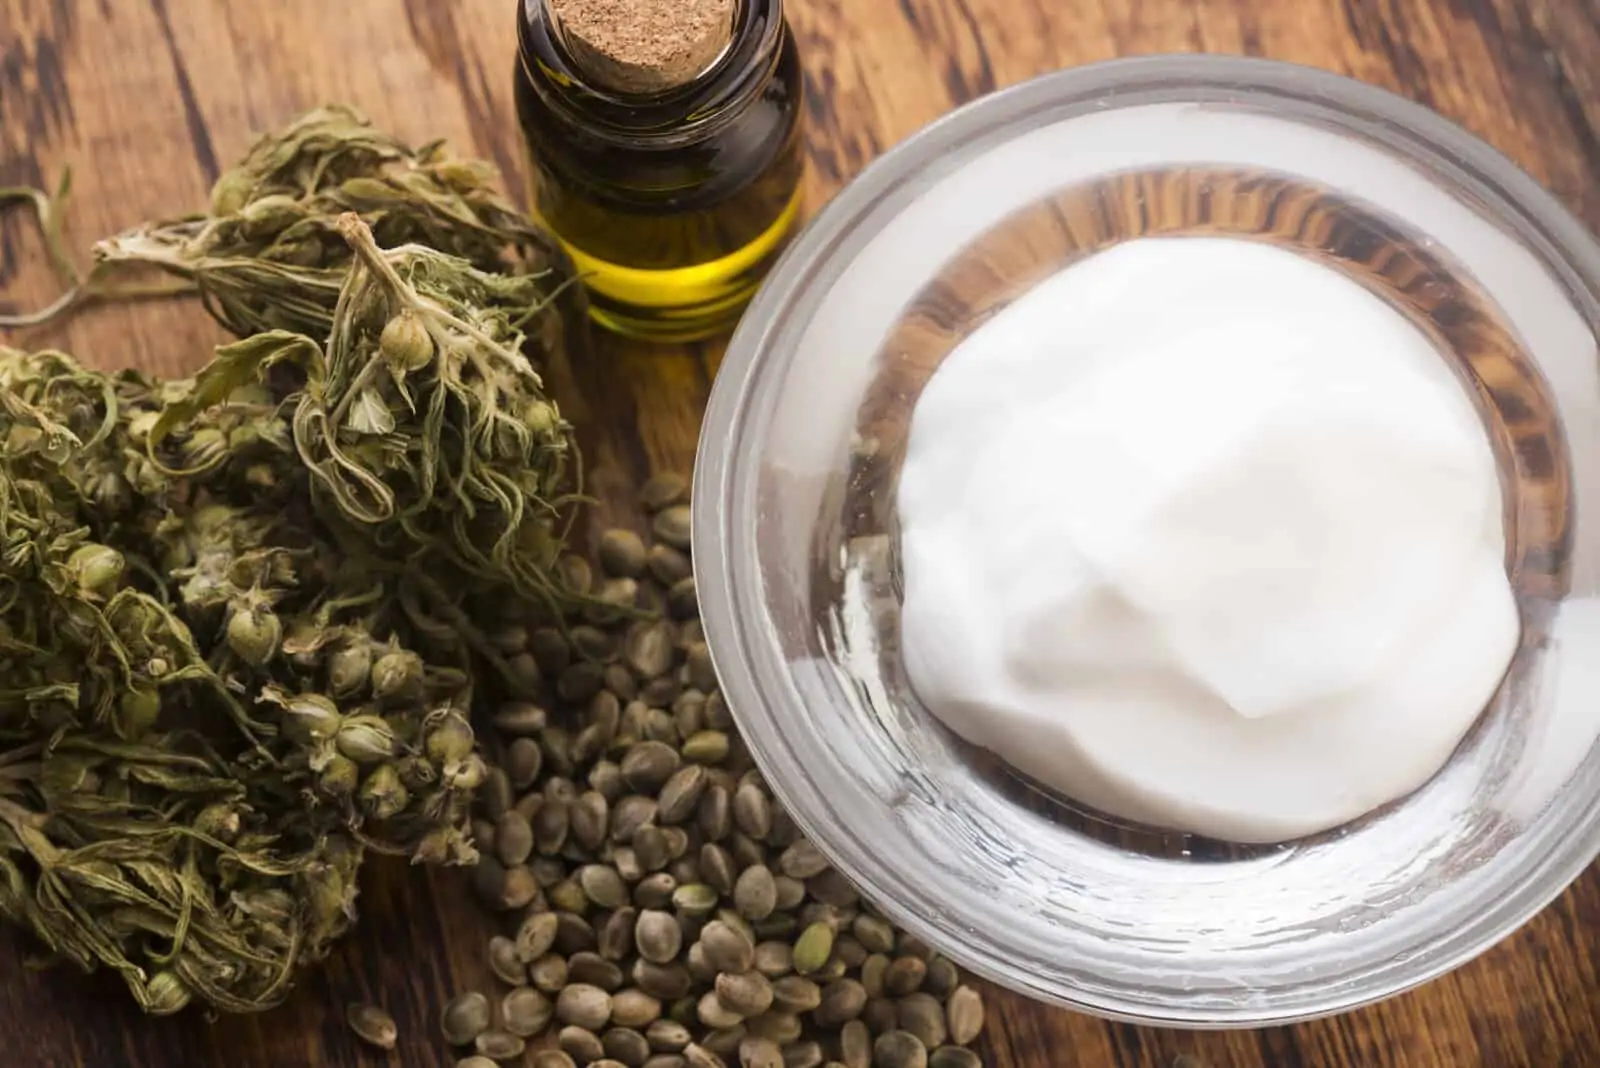 What You Should Know About CBD Cream